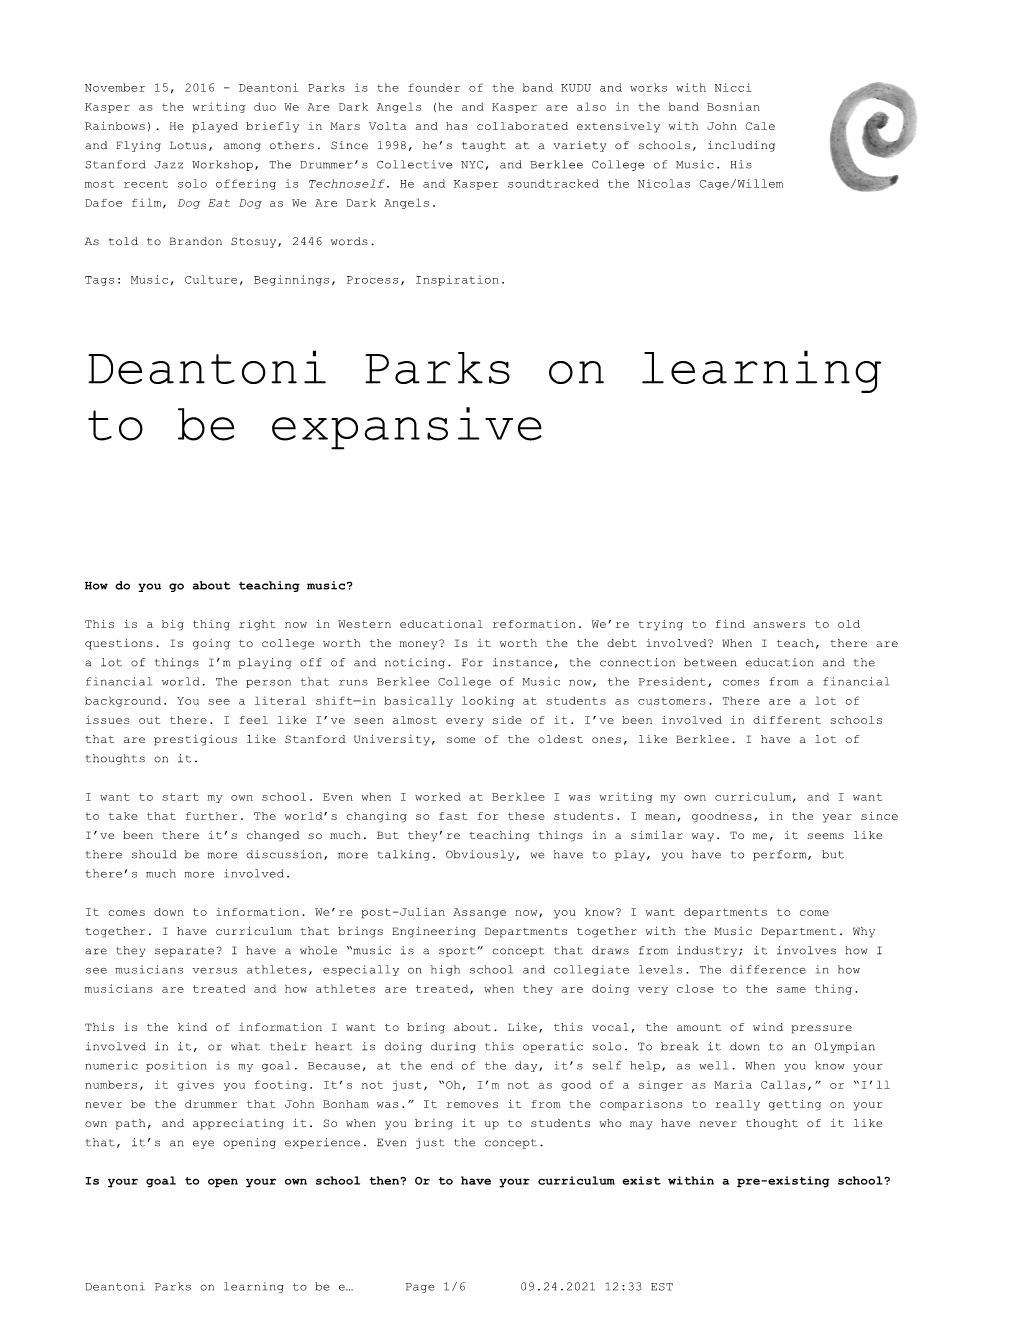 Deantoni Parks on Learning to Be Expansive